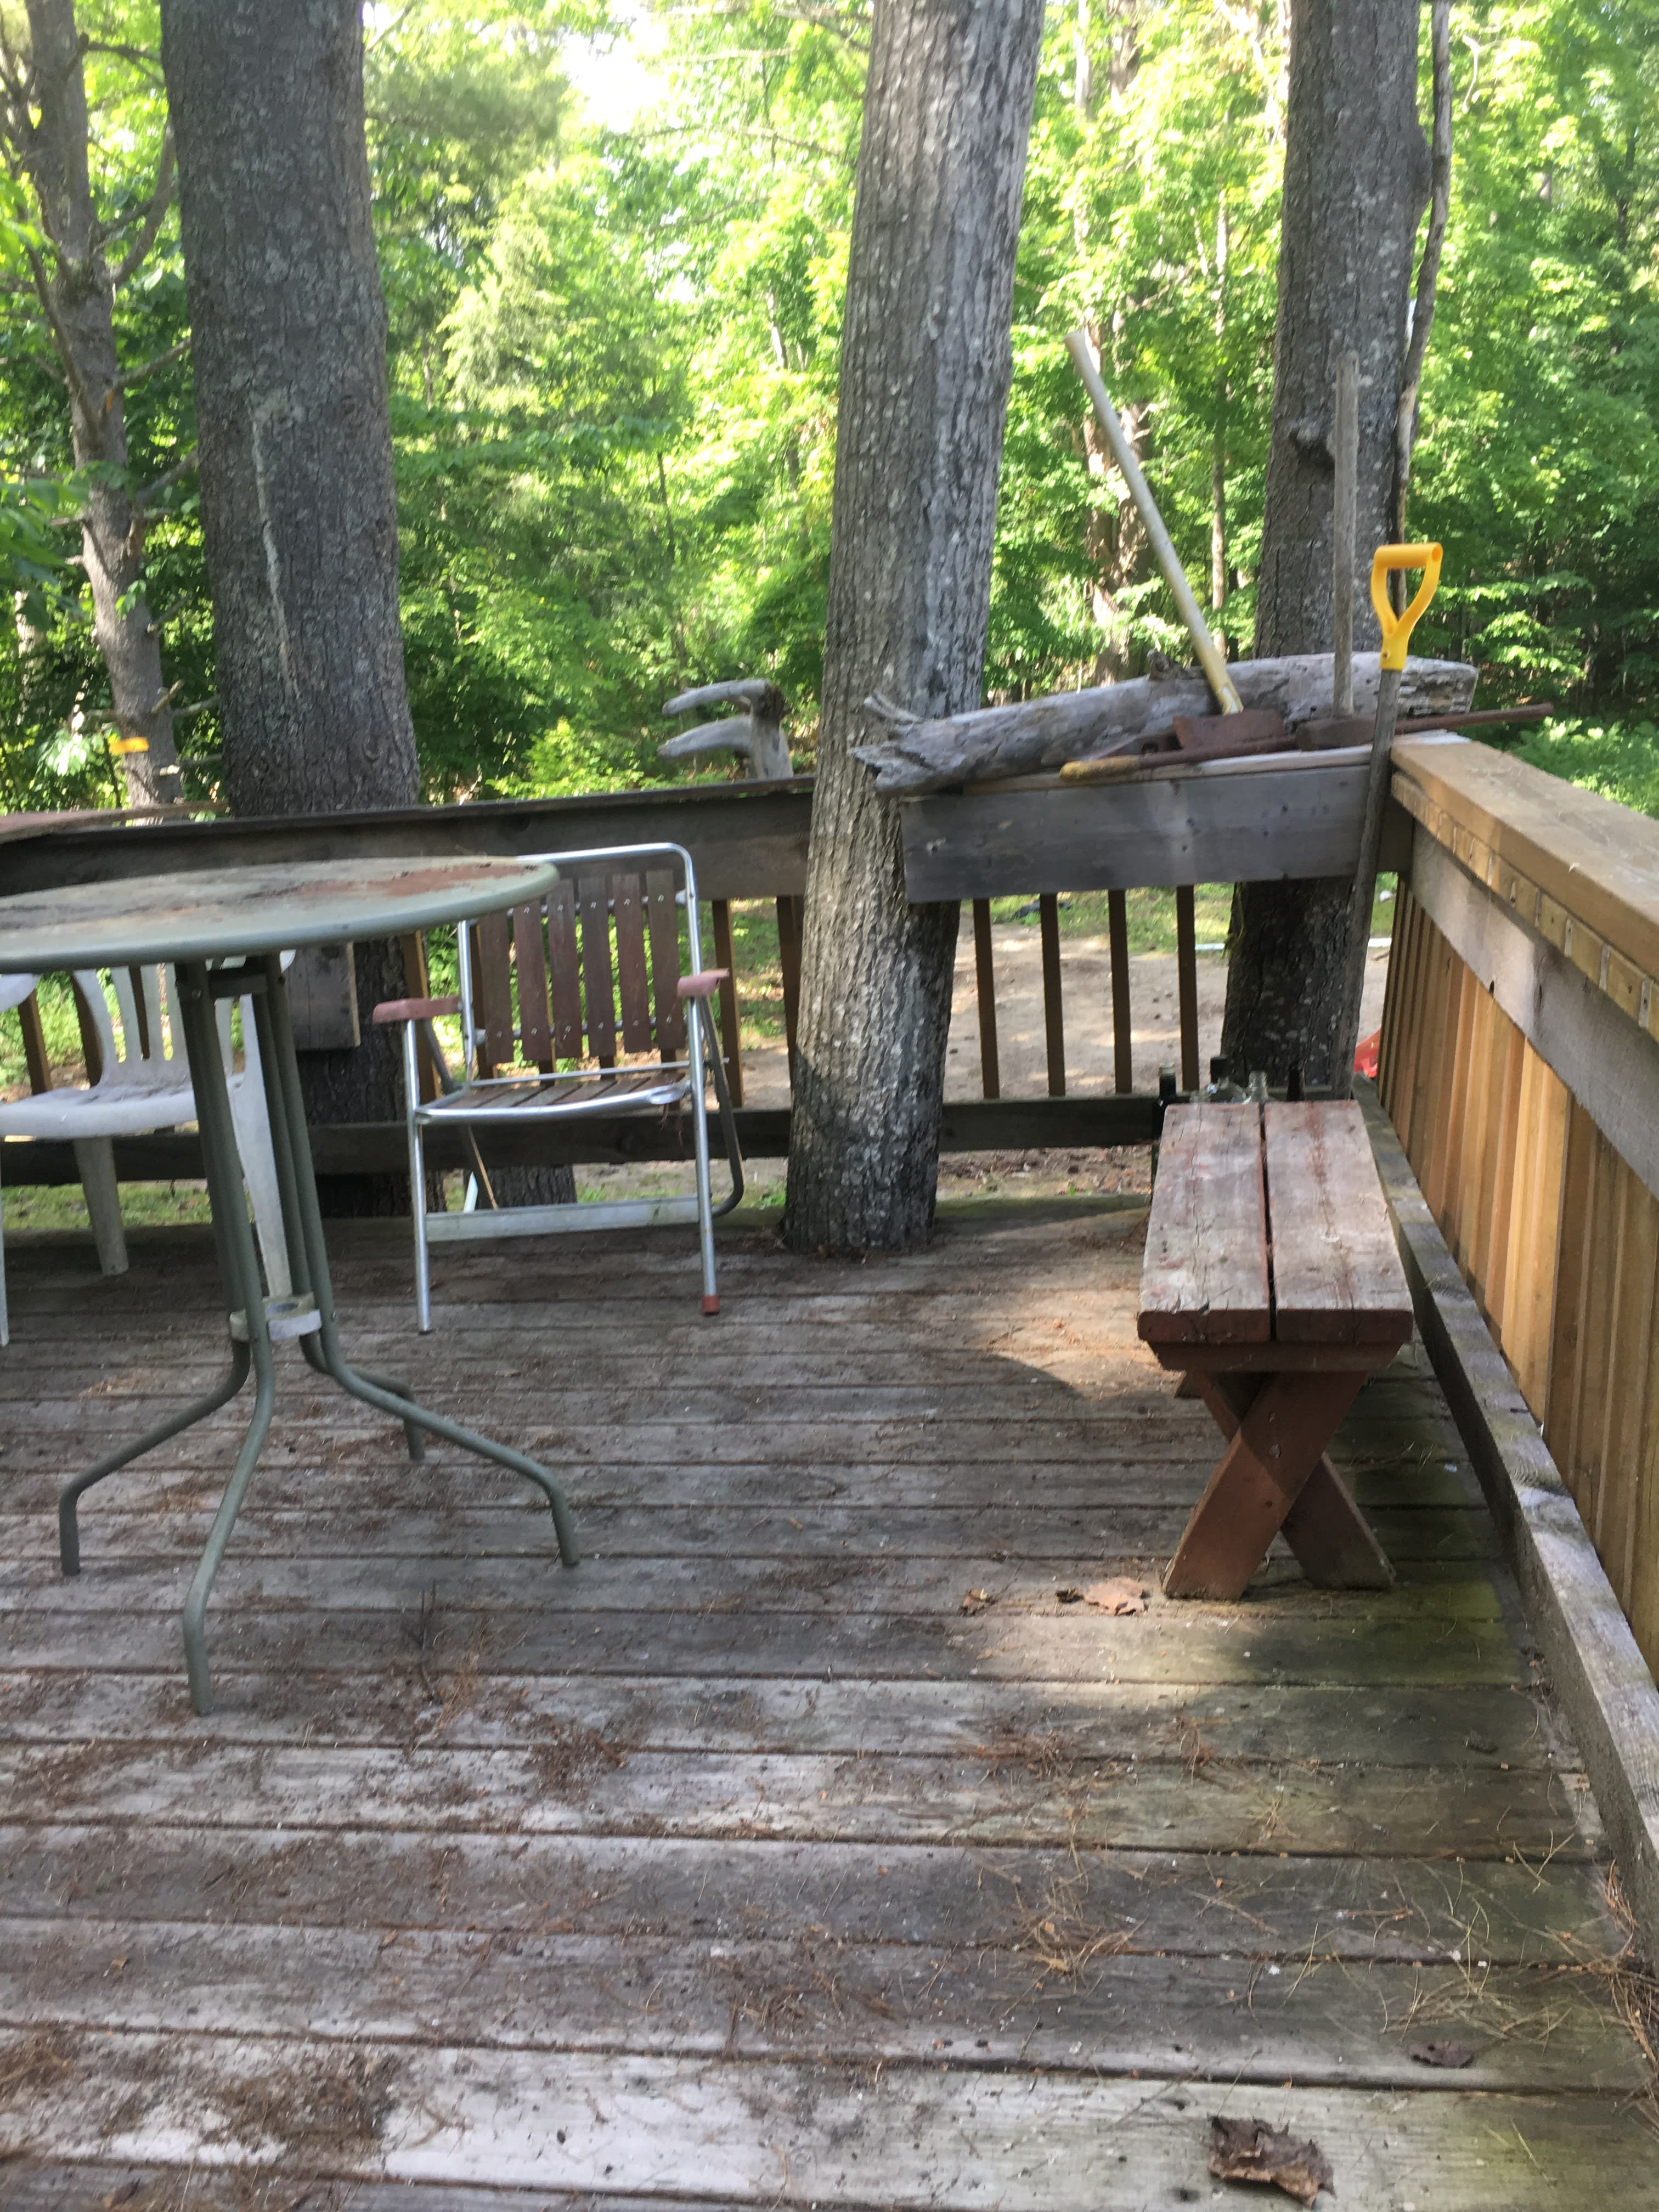 Have your coffee or lunch on the treehouse deck.